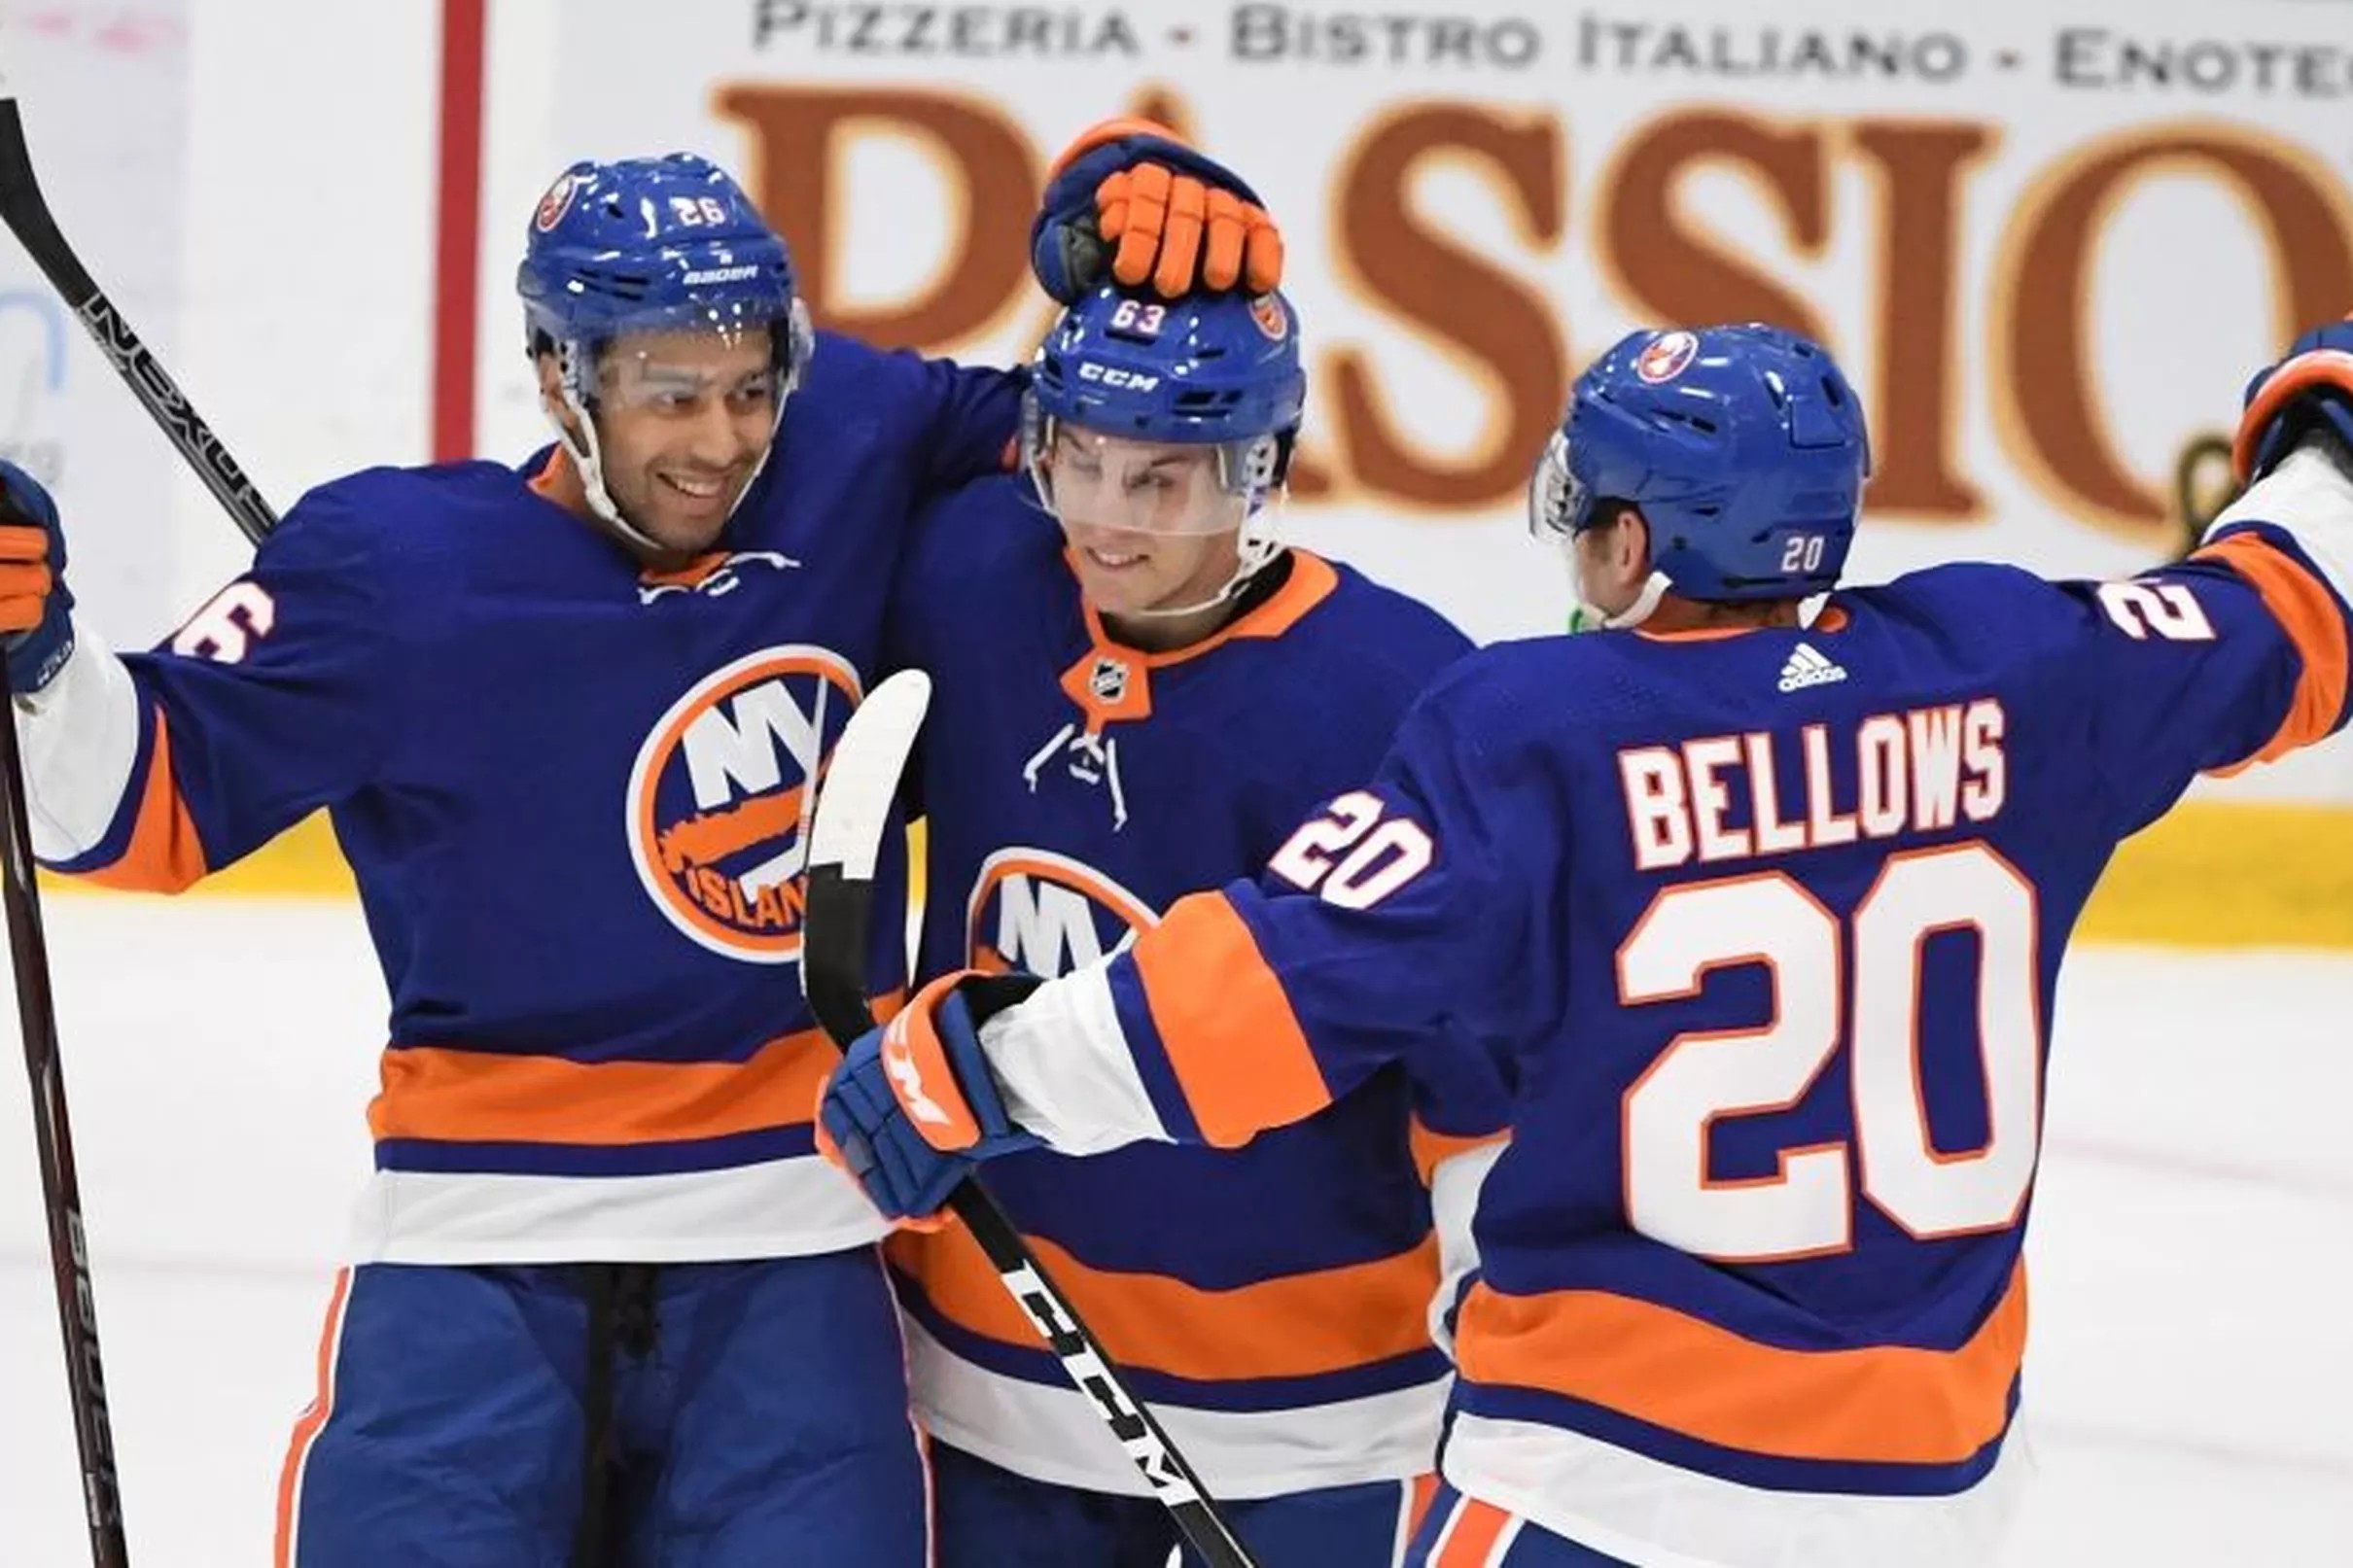 Islanders News: Rookie camp just flew by (or, uh, Flyer’d by?)